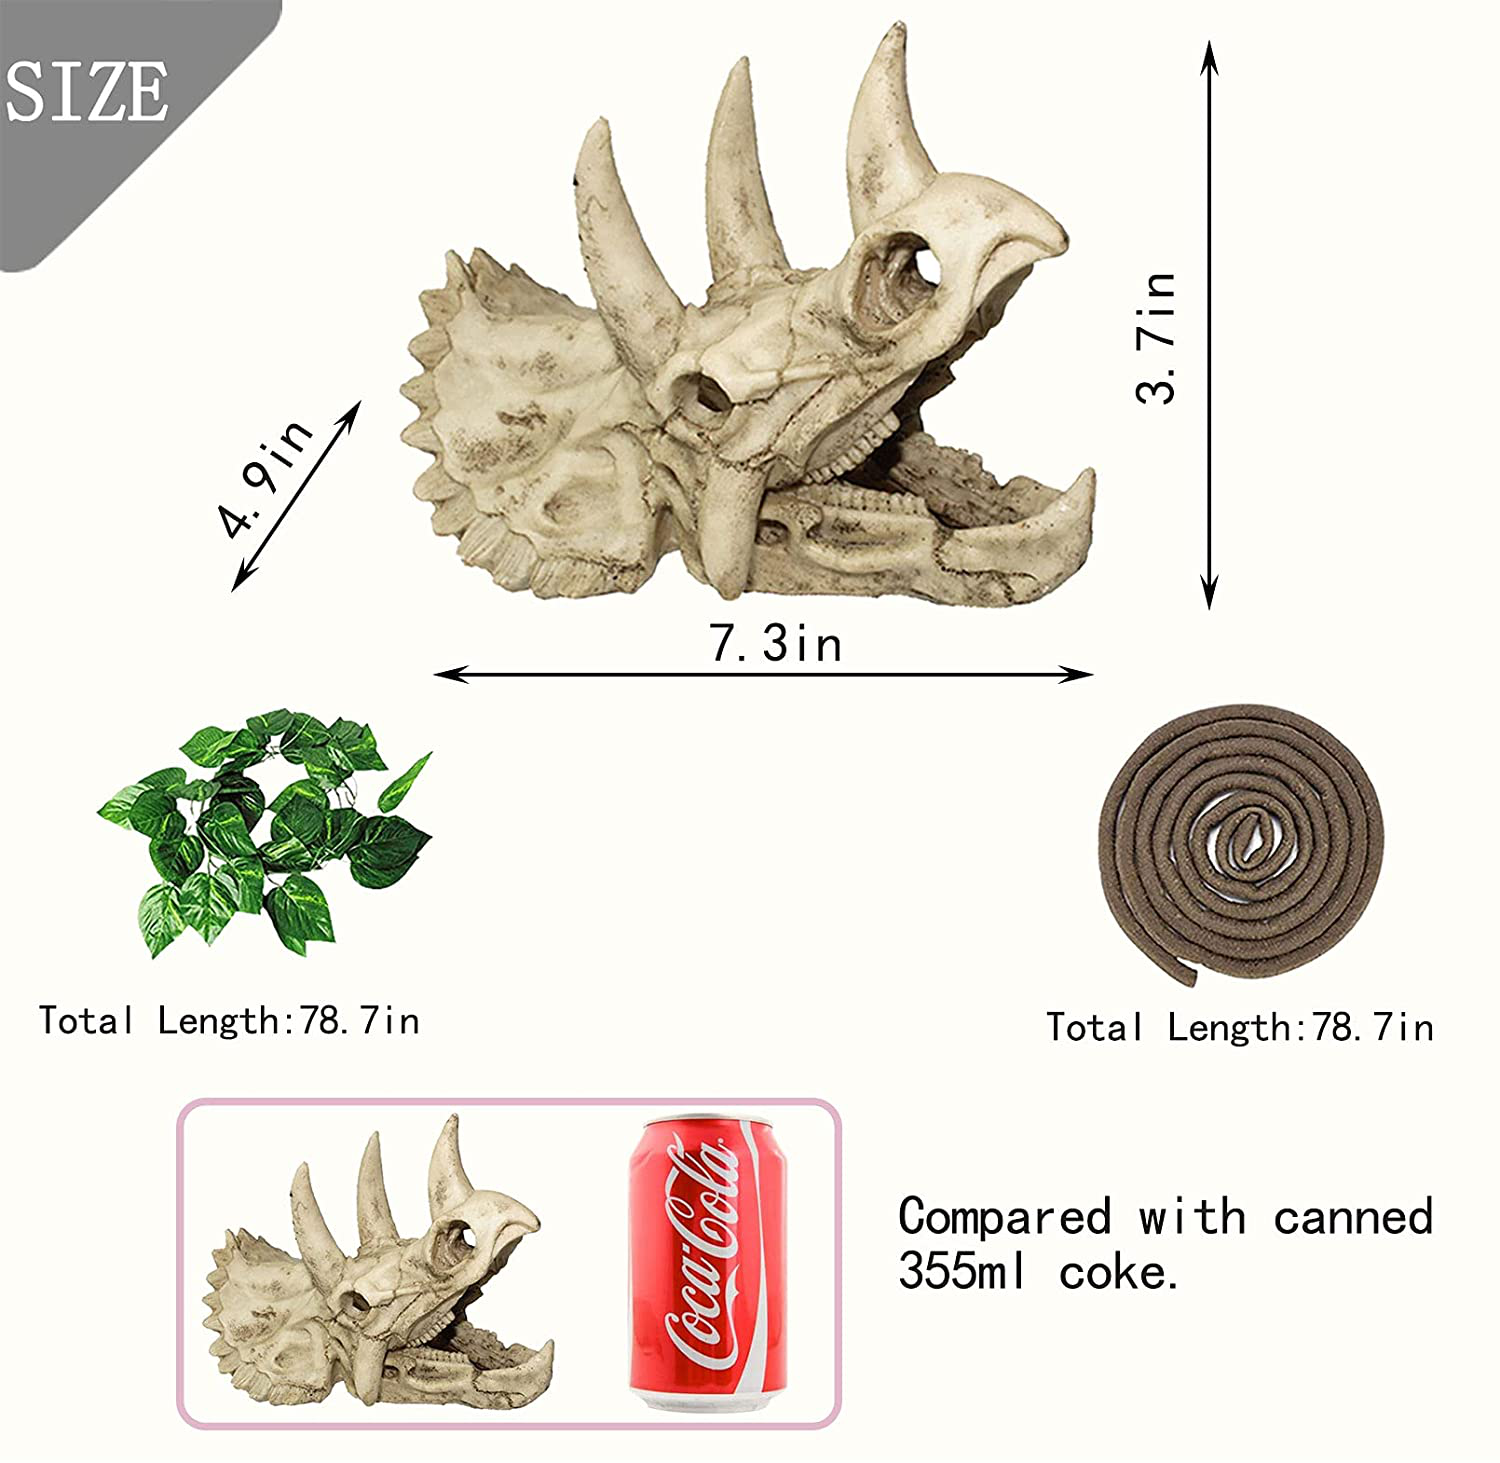 Tfwadmx Bearded Dragon Tank Accessories Resin Dinosaur Triceratops Skull Skeleton Reptiles Hideouts Cave Vines Leaves Aquarium Decorations for Lizards,Chameleon,Snake,Spider,Gecko Animals & Pet Supplies > Pet Supplies > Reptile & Amphibian Supplies > Reptile & Amphibian Habitat Accessories Tfwadmx   